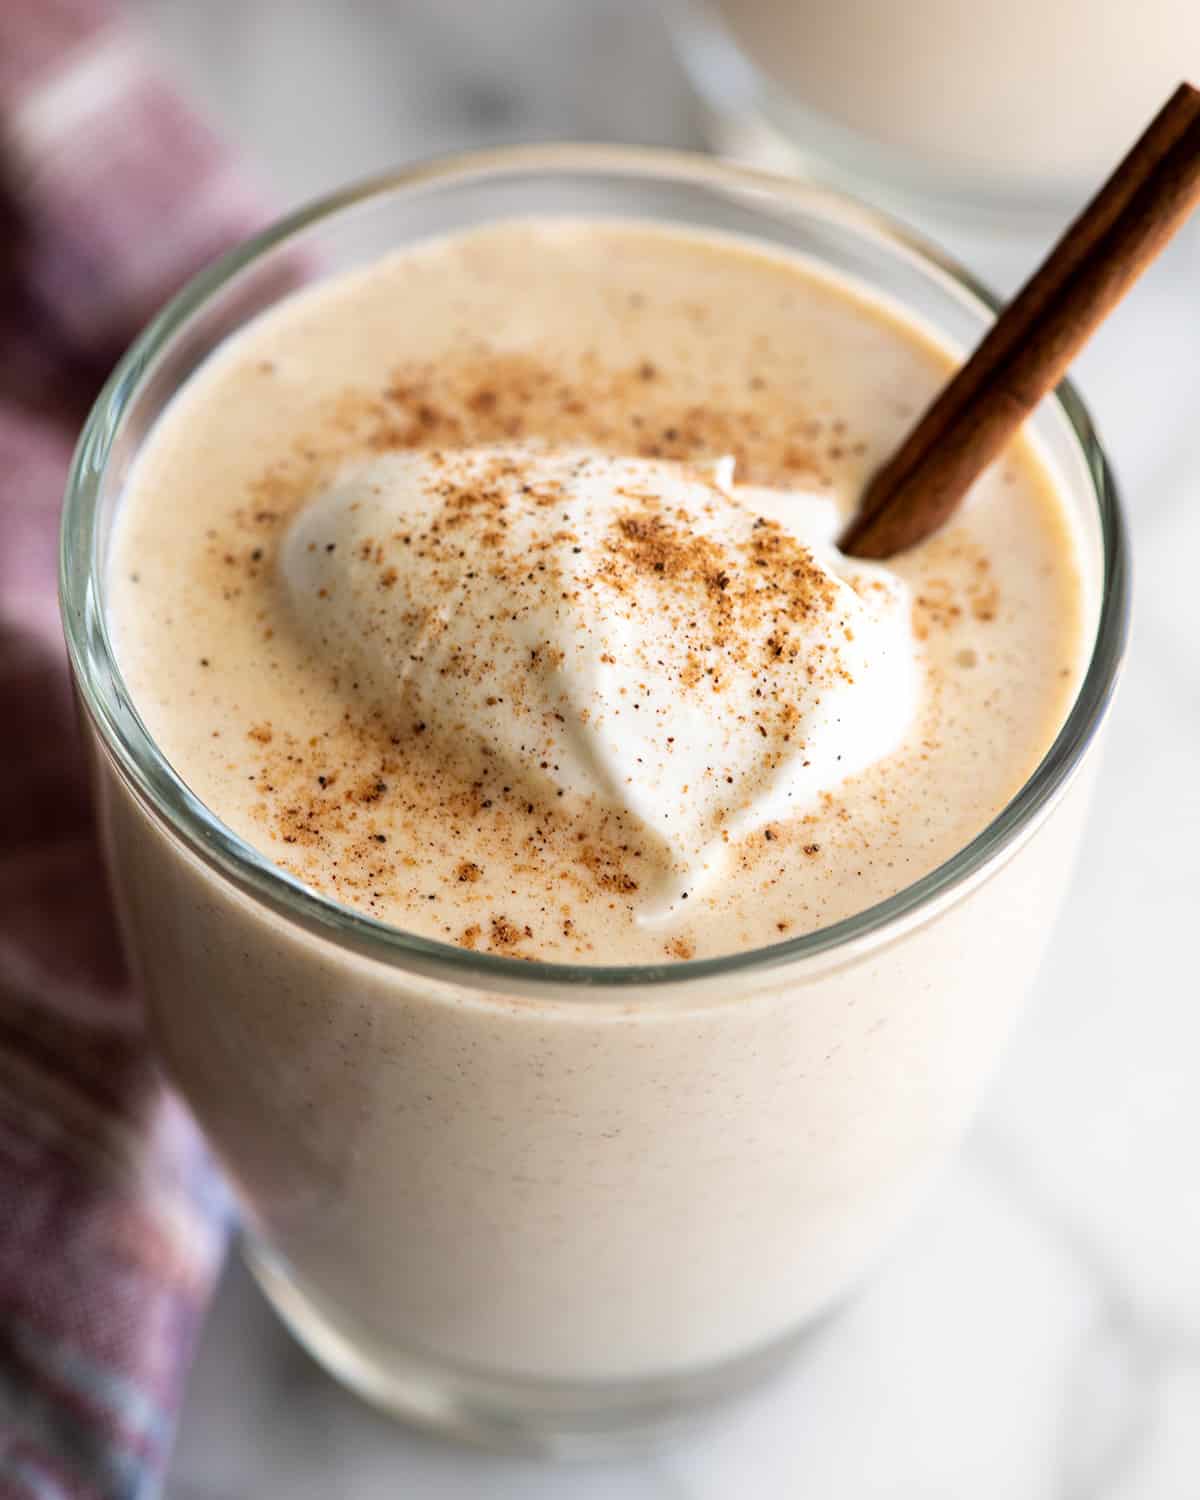 a glass of Homemade Eggnog with whipped cream and ground nutmeg on top and a cinnamon stick inside.